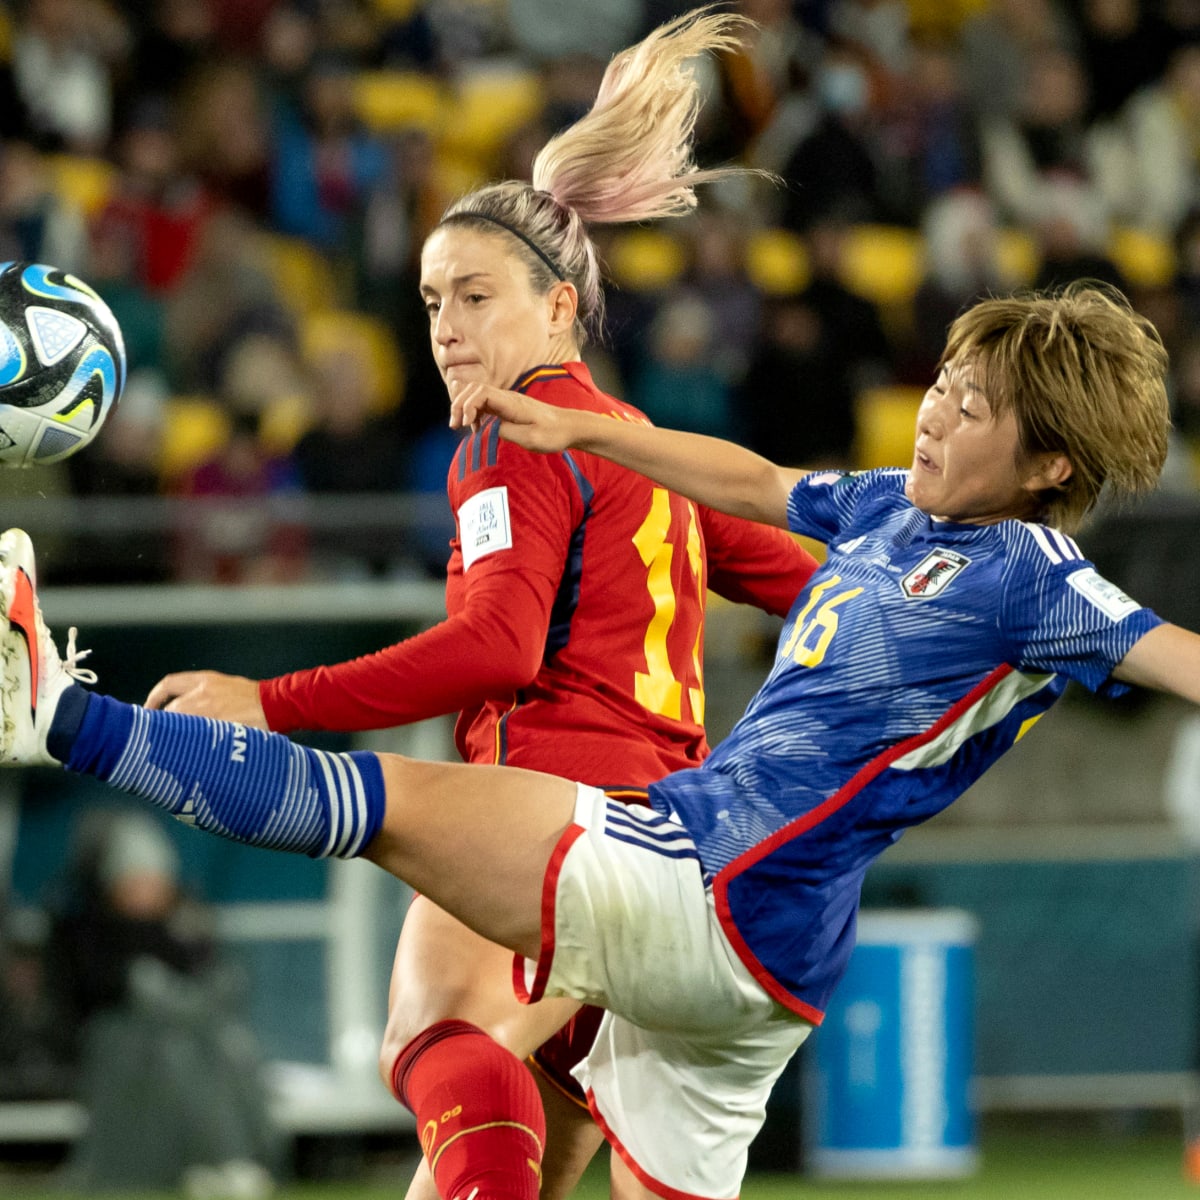 Women's World Cup power rankings: England moves up, but Spain